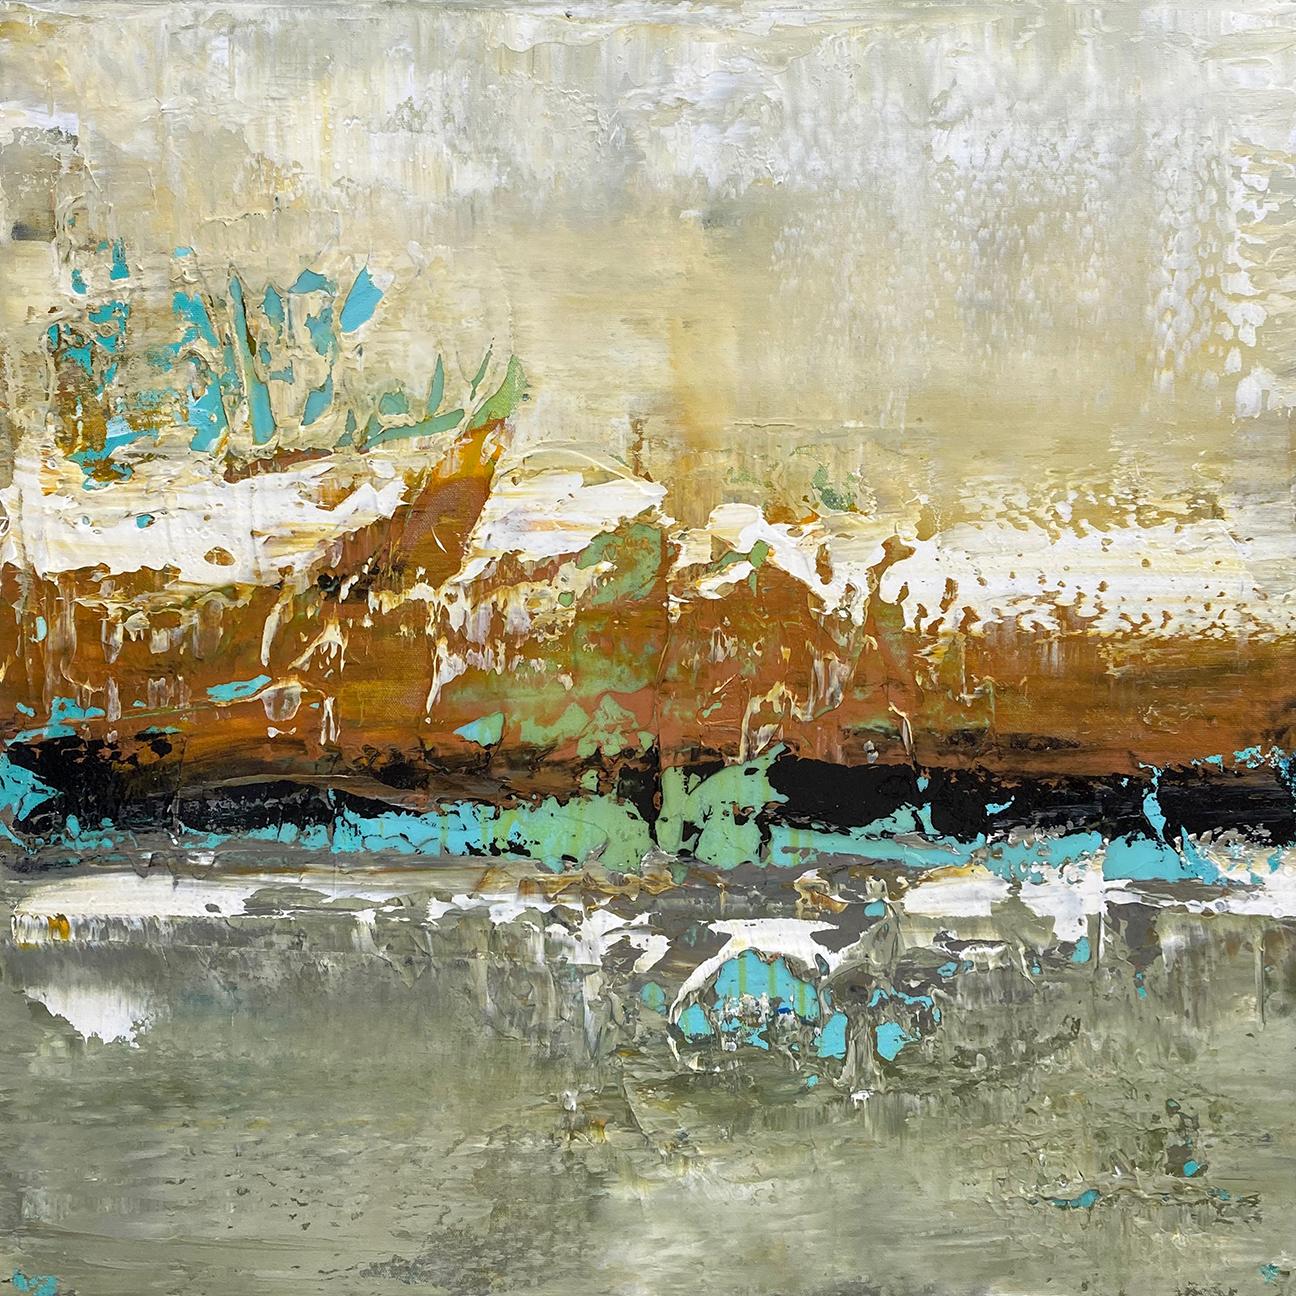 Untitled, no 3 - Earthy Hues Textured Abstract Landscape Painting - Mixed Media Art by Brad Robertson